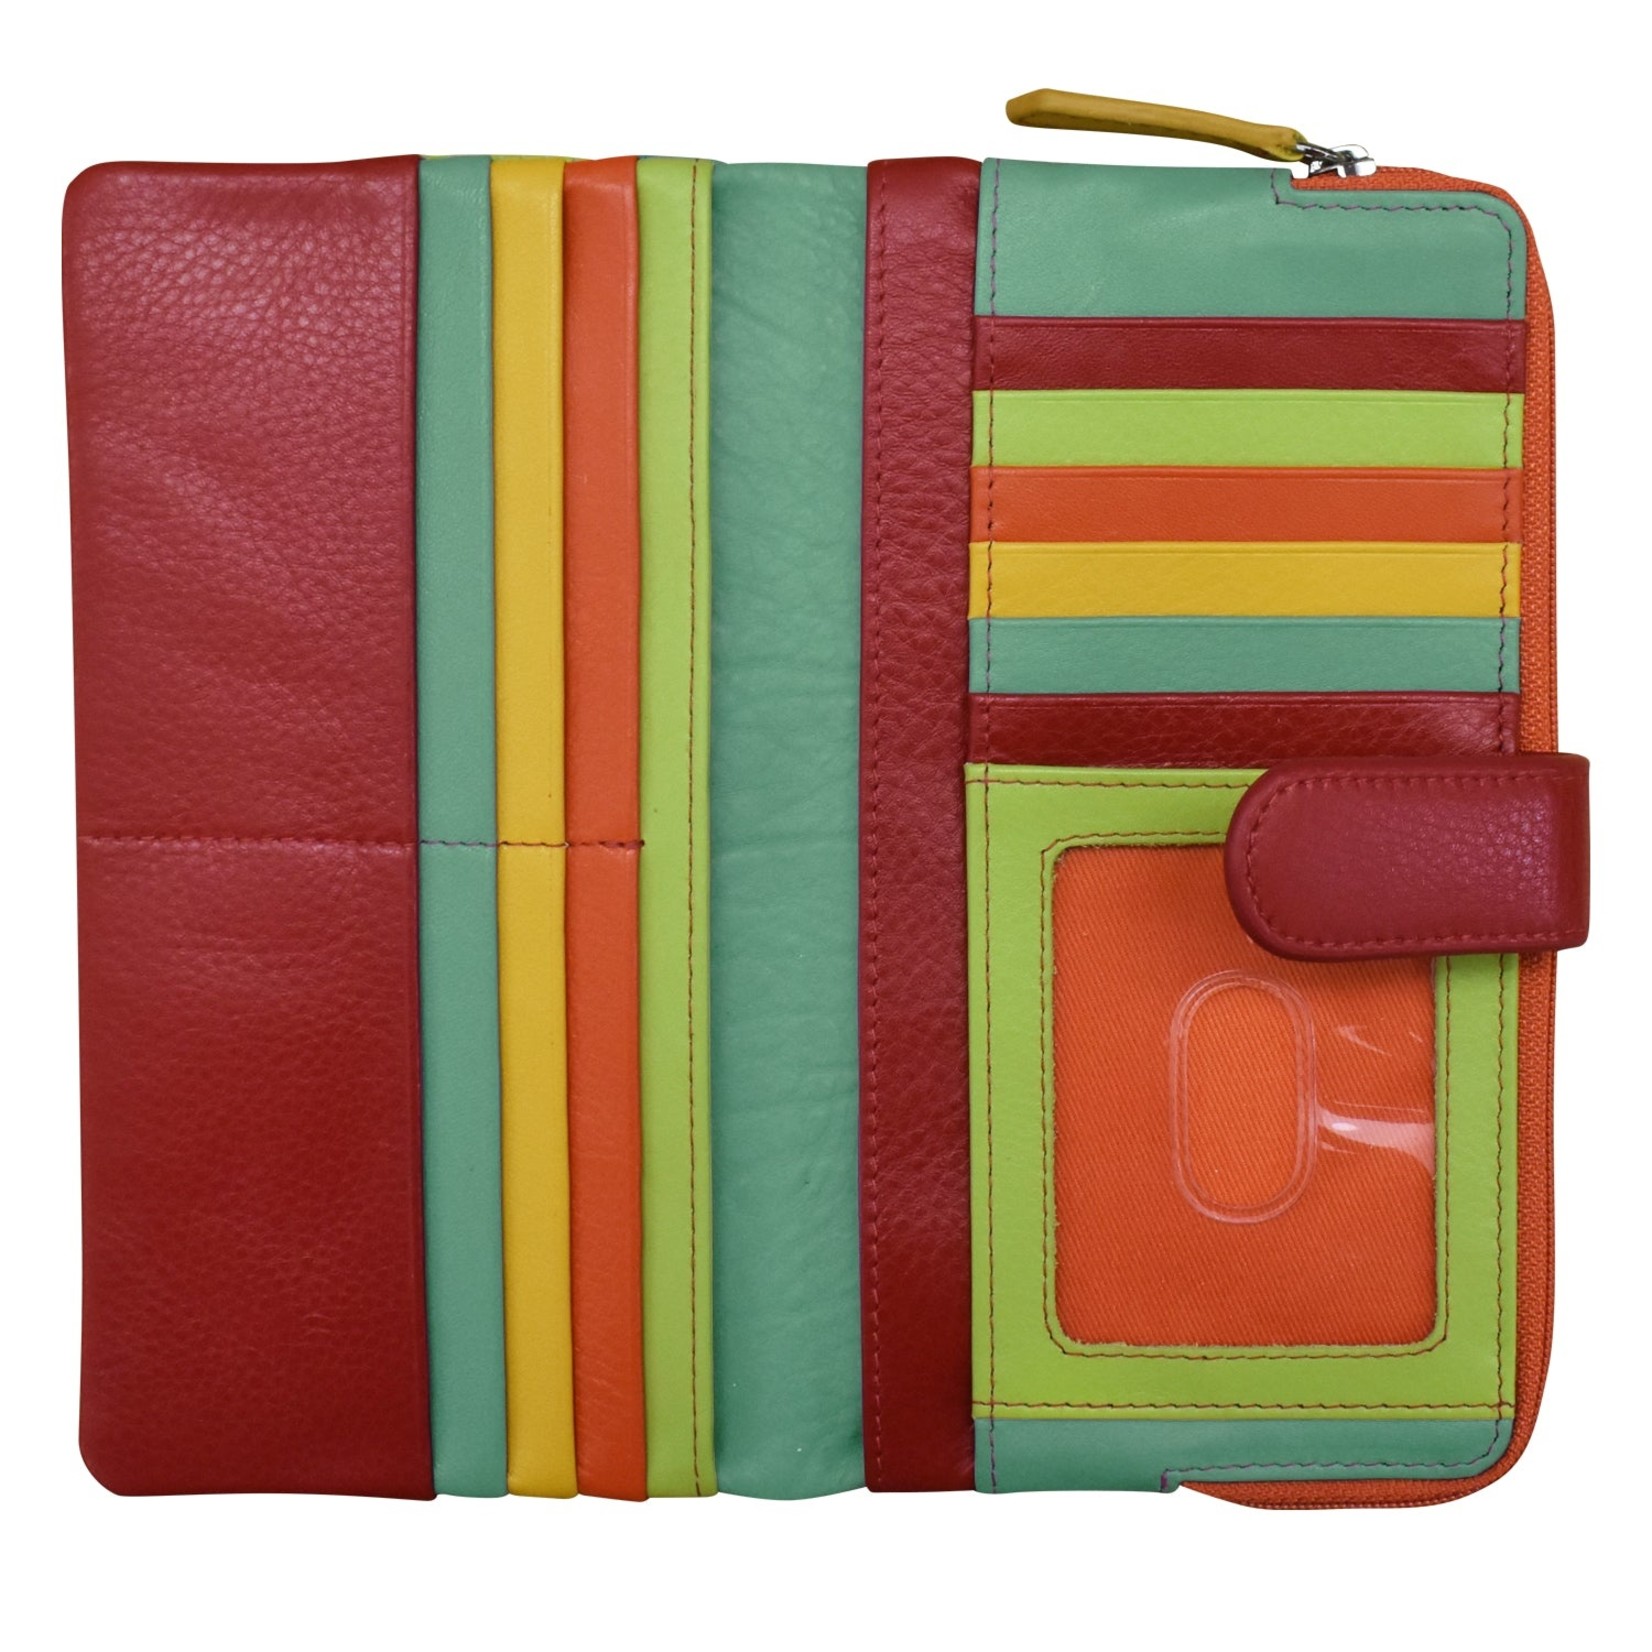 Leather Handbags and Accessories 7420 Citrus - RFID Smartphone Wallet